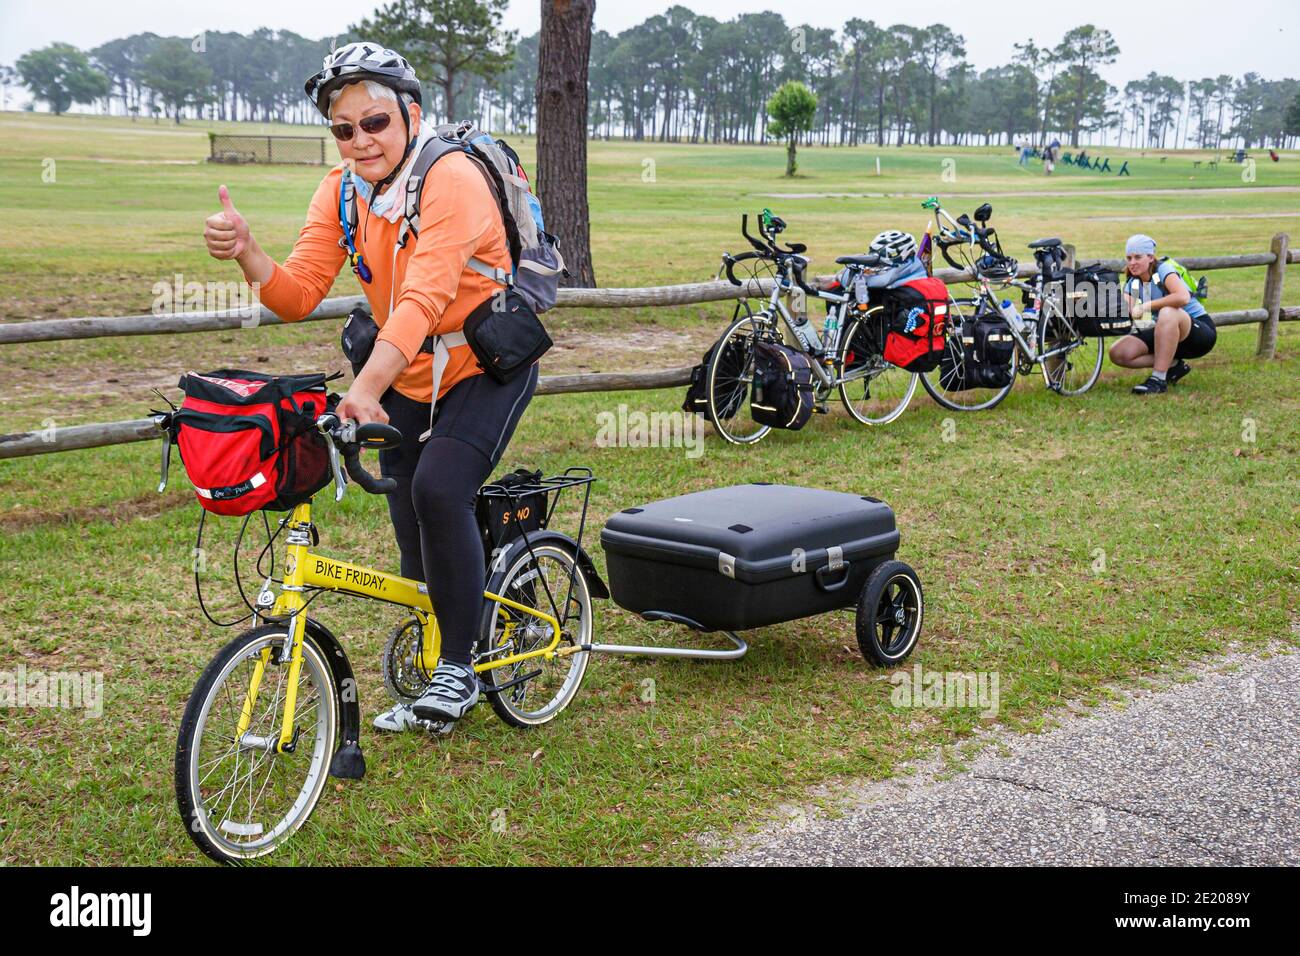 Alabama Mobile Brookley Center centre Underground Railroad Adventure,Bicycle Highway Route Asian woman female riding thumbs up, Stock Photo